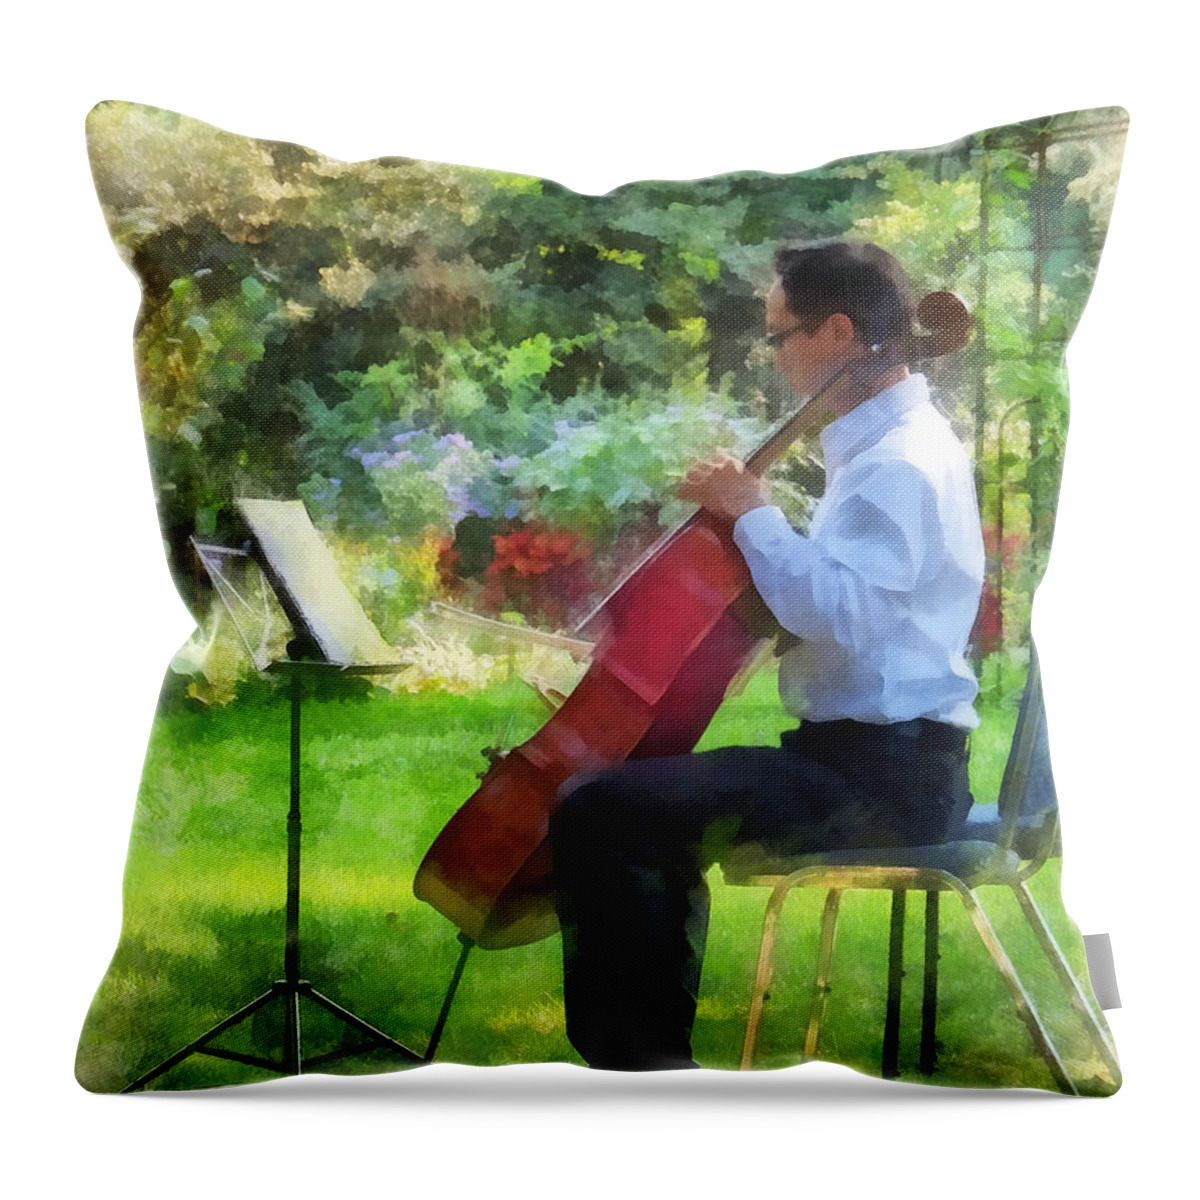 Cello Throw Pillow featuring the photograph Cellist in the Garden by Susan Savad